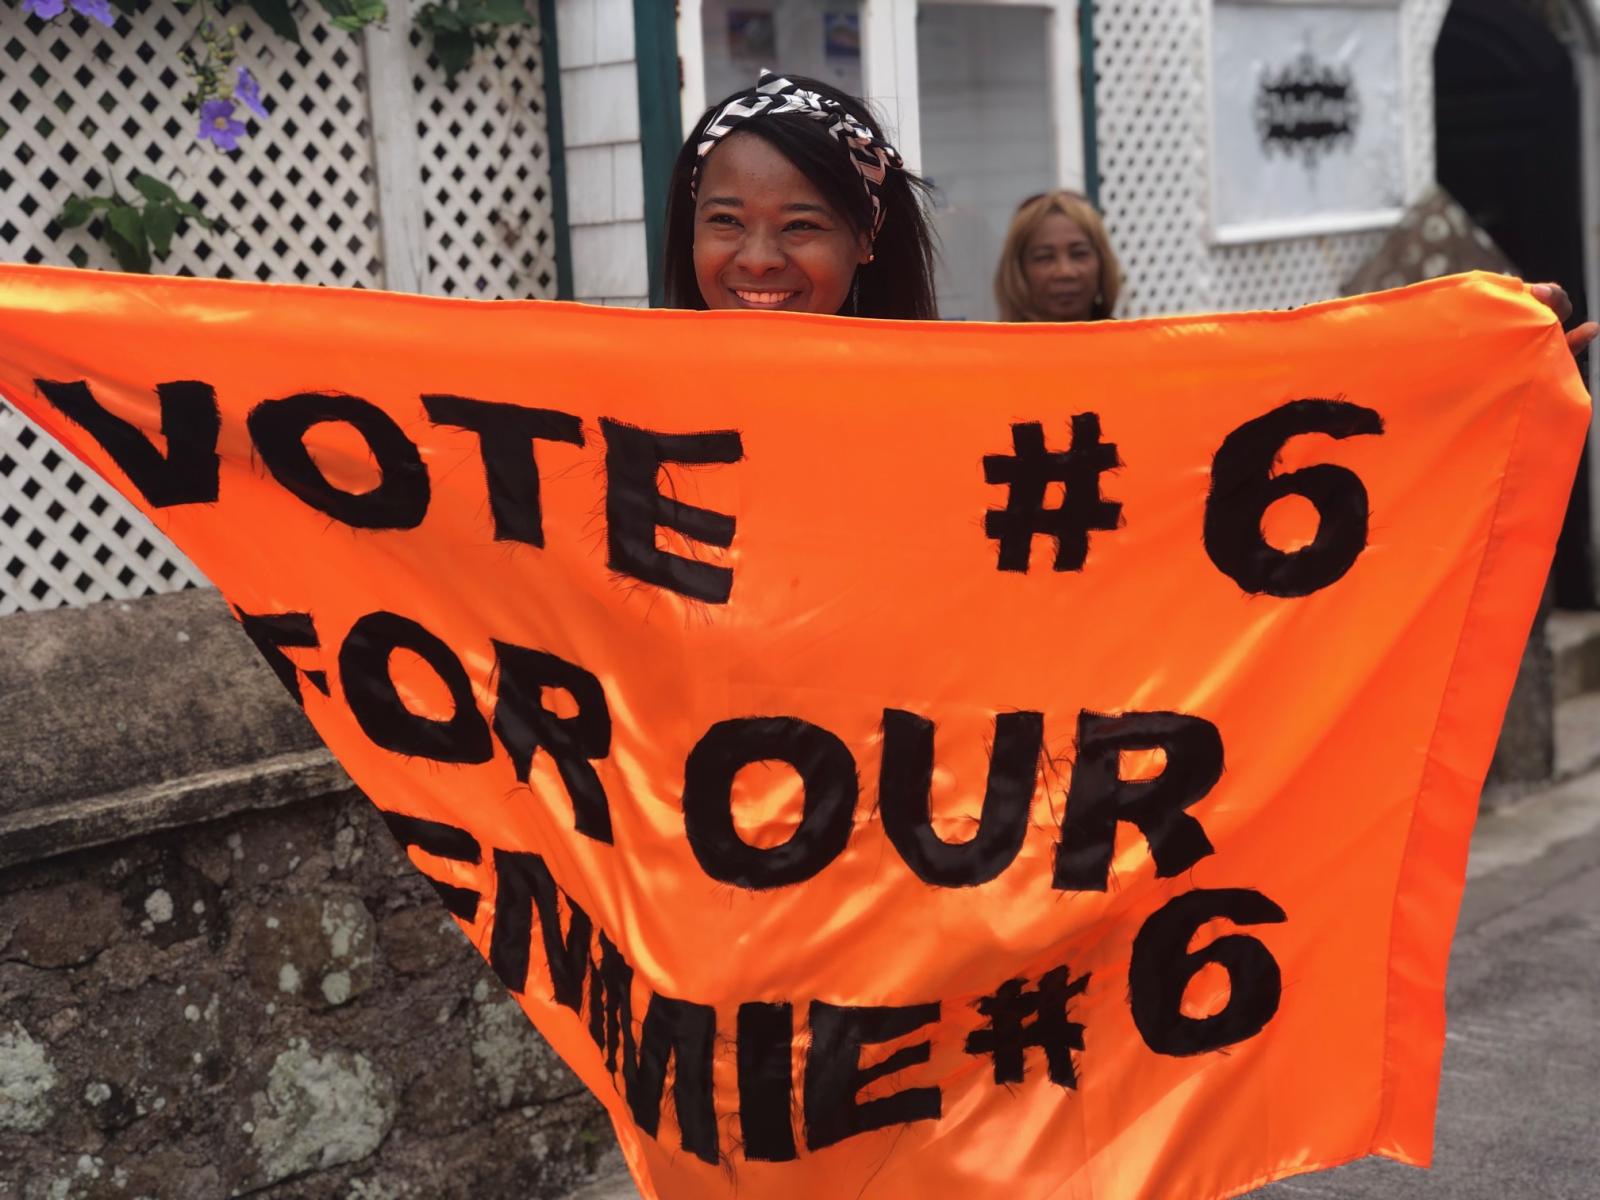 Saba citizen holds banner in support of a candidate